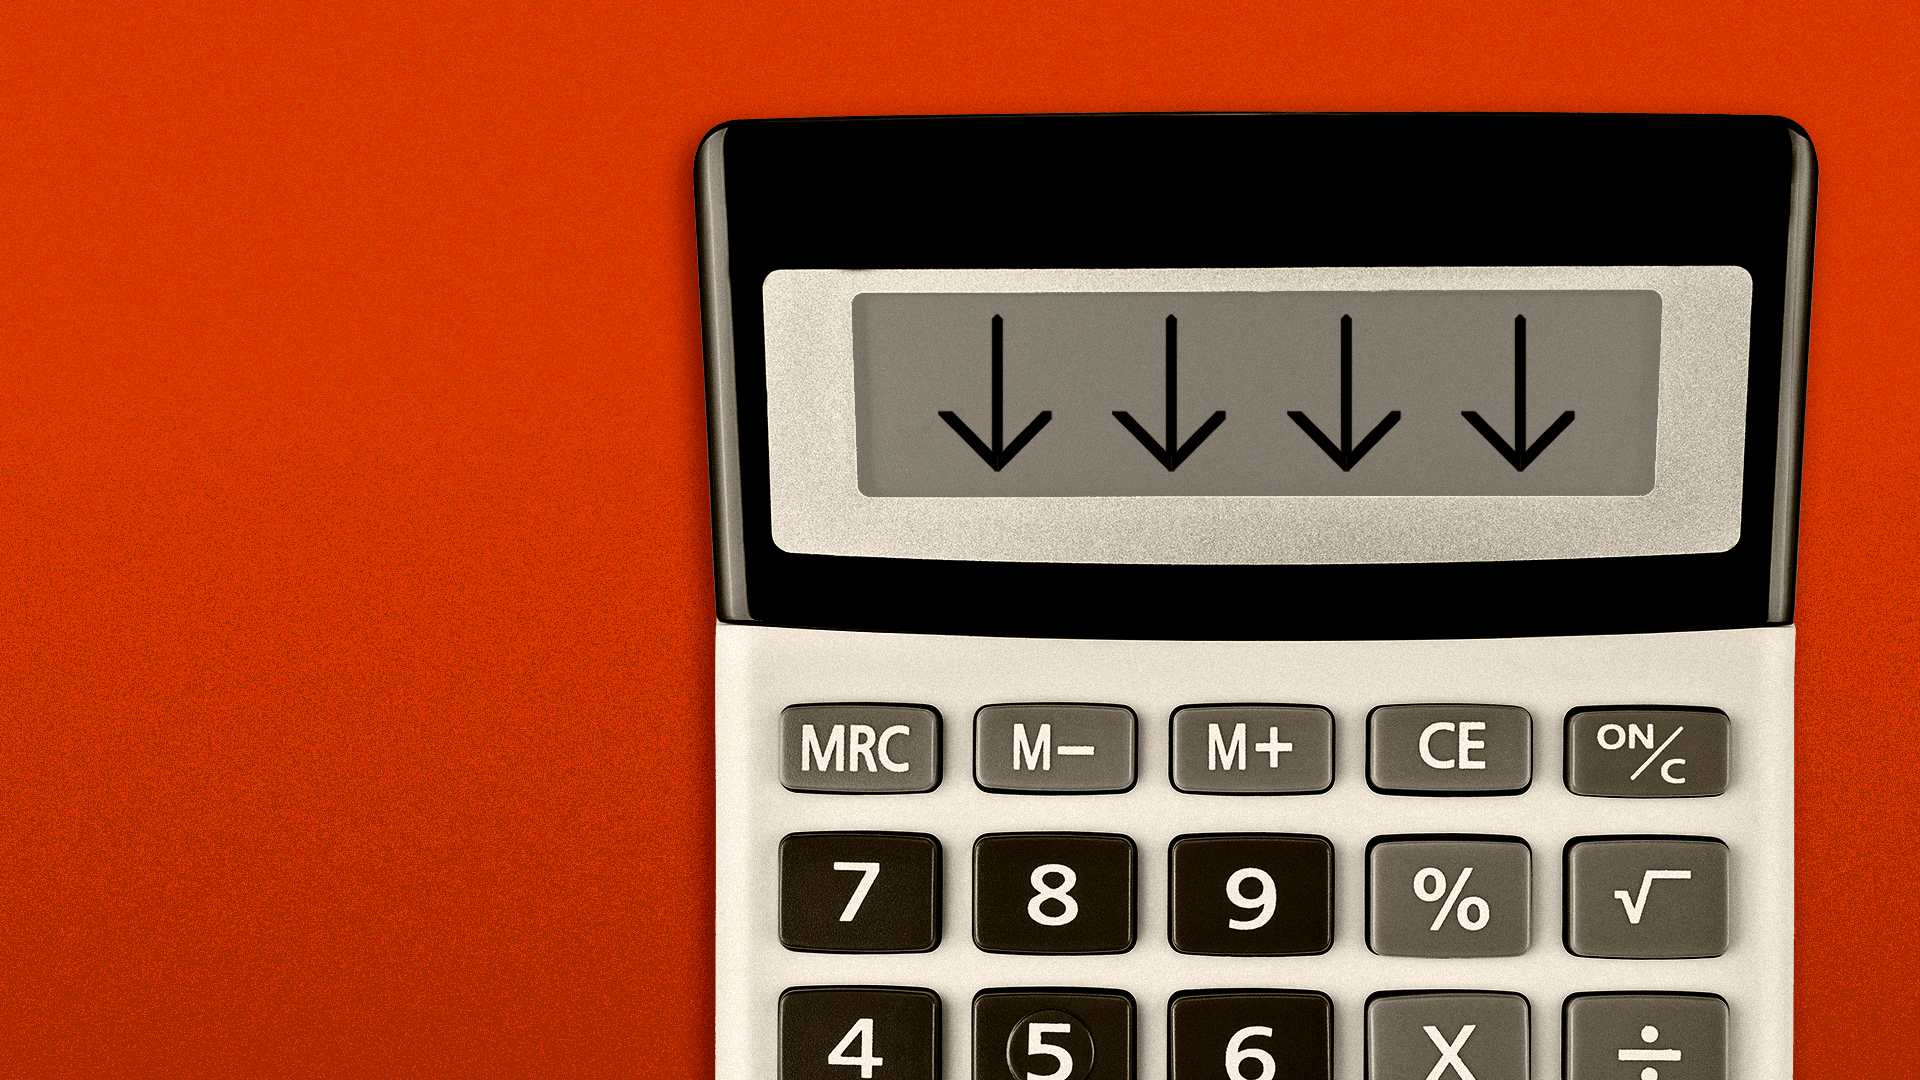 Illustration of a calculator with downward arrows flashing on the screen.